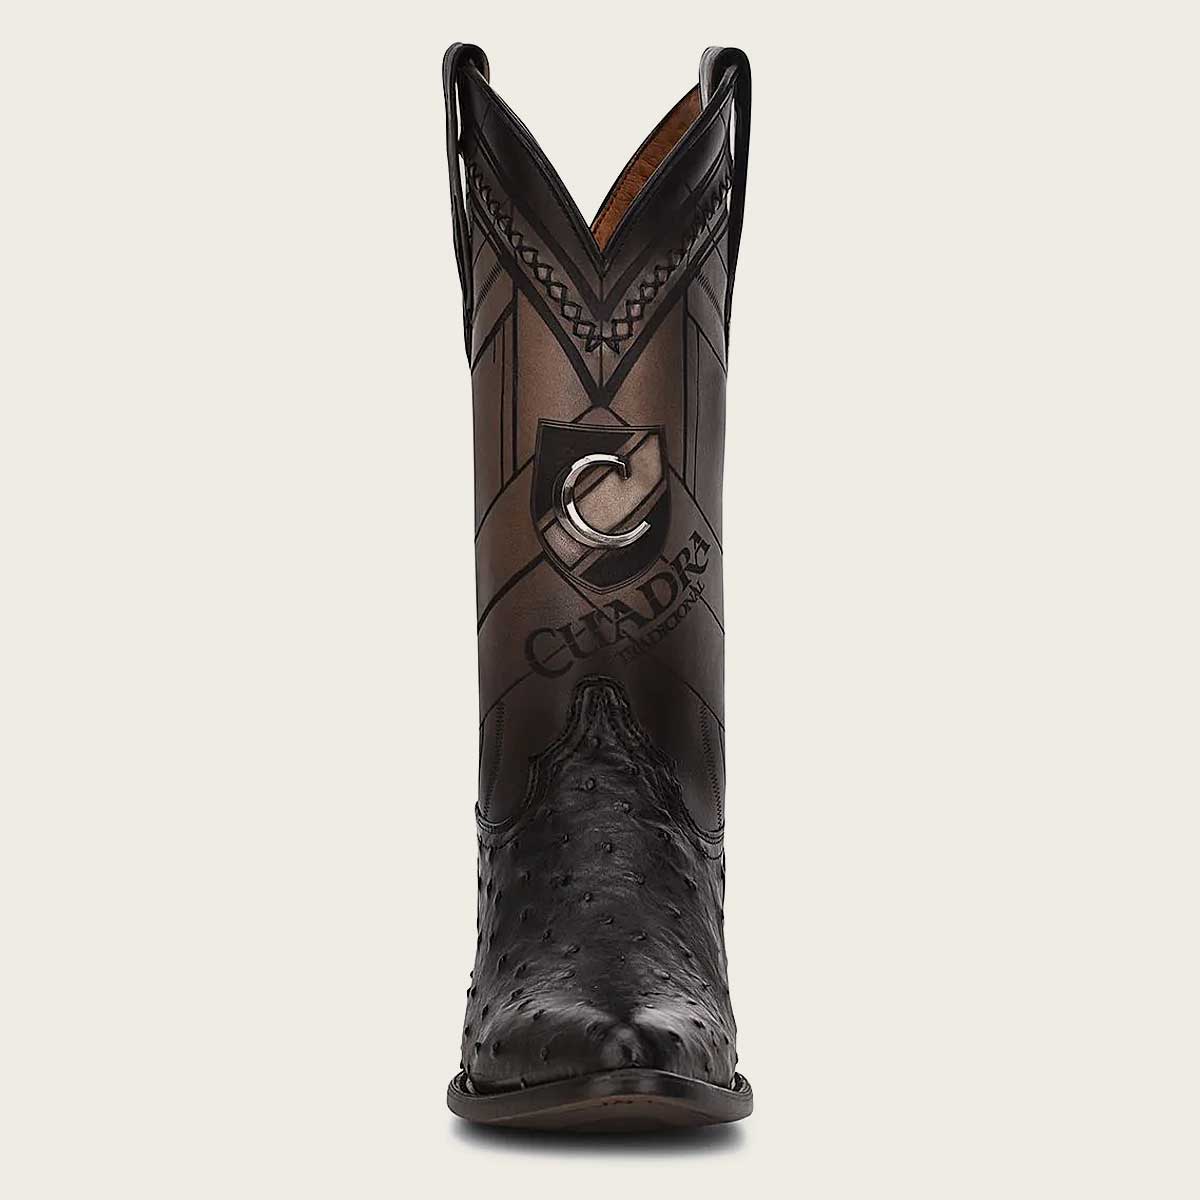 Stylish men's western boot crafted from genuine ostrich leather with intricate laser-engraved details.